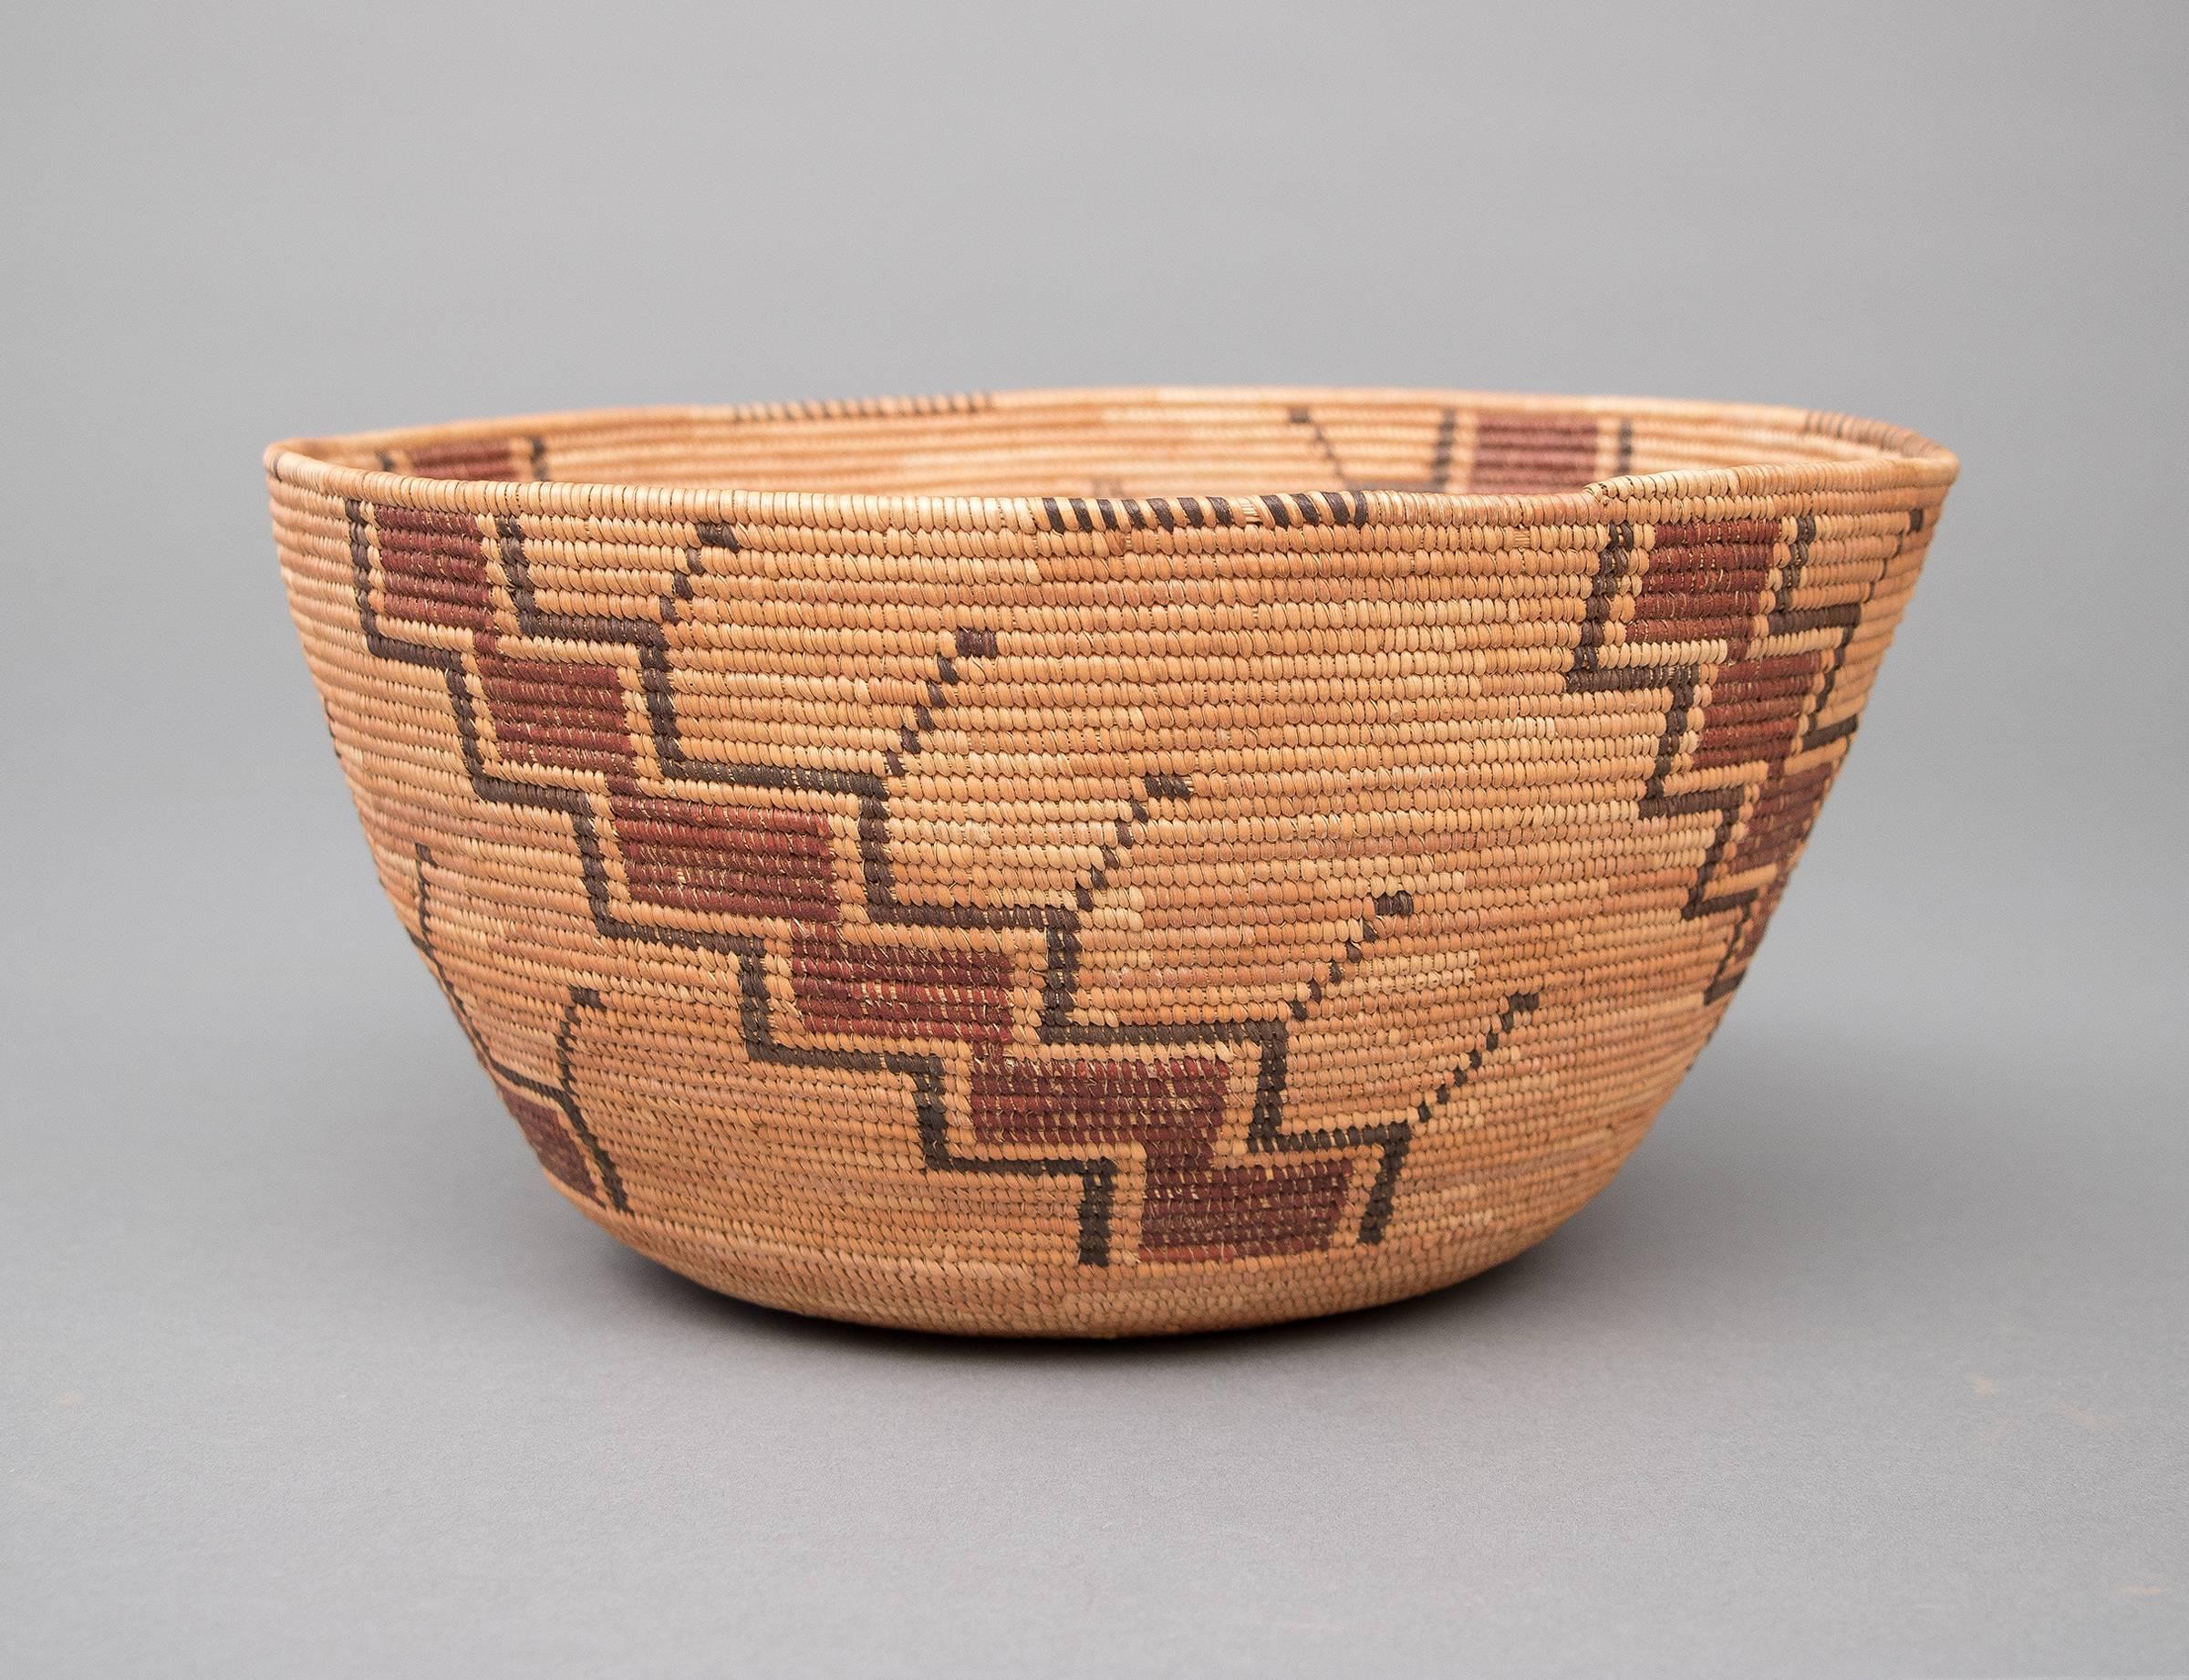 A polychrome basketry bowl with a geometric design. Expertly woven by a member of the Yokuts tribe which occupied the San Joaquin Valley of California, circa 1890.

Expedited and international shipping is available, please contact us for an